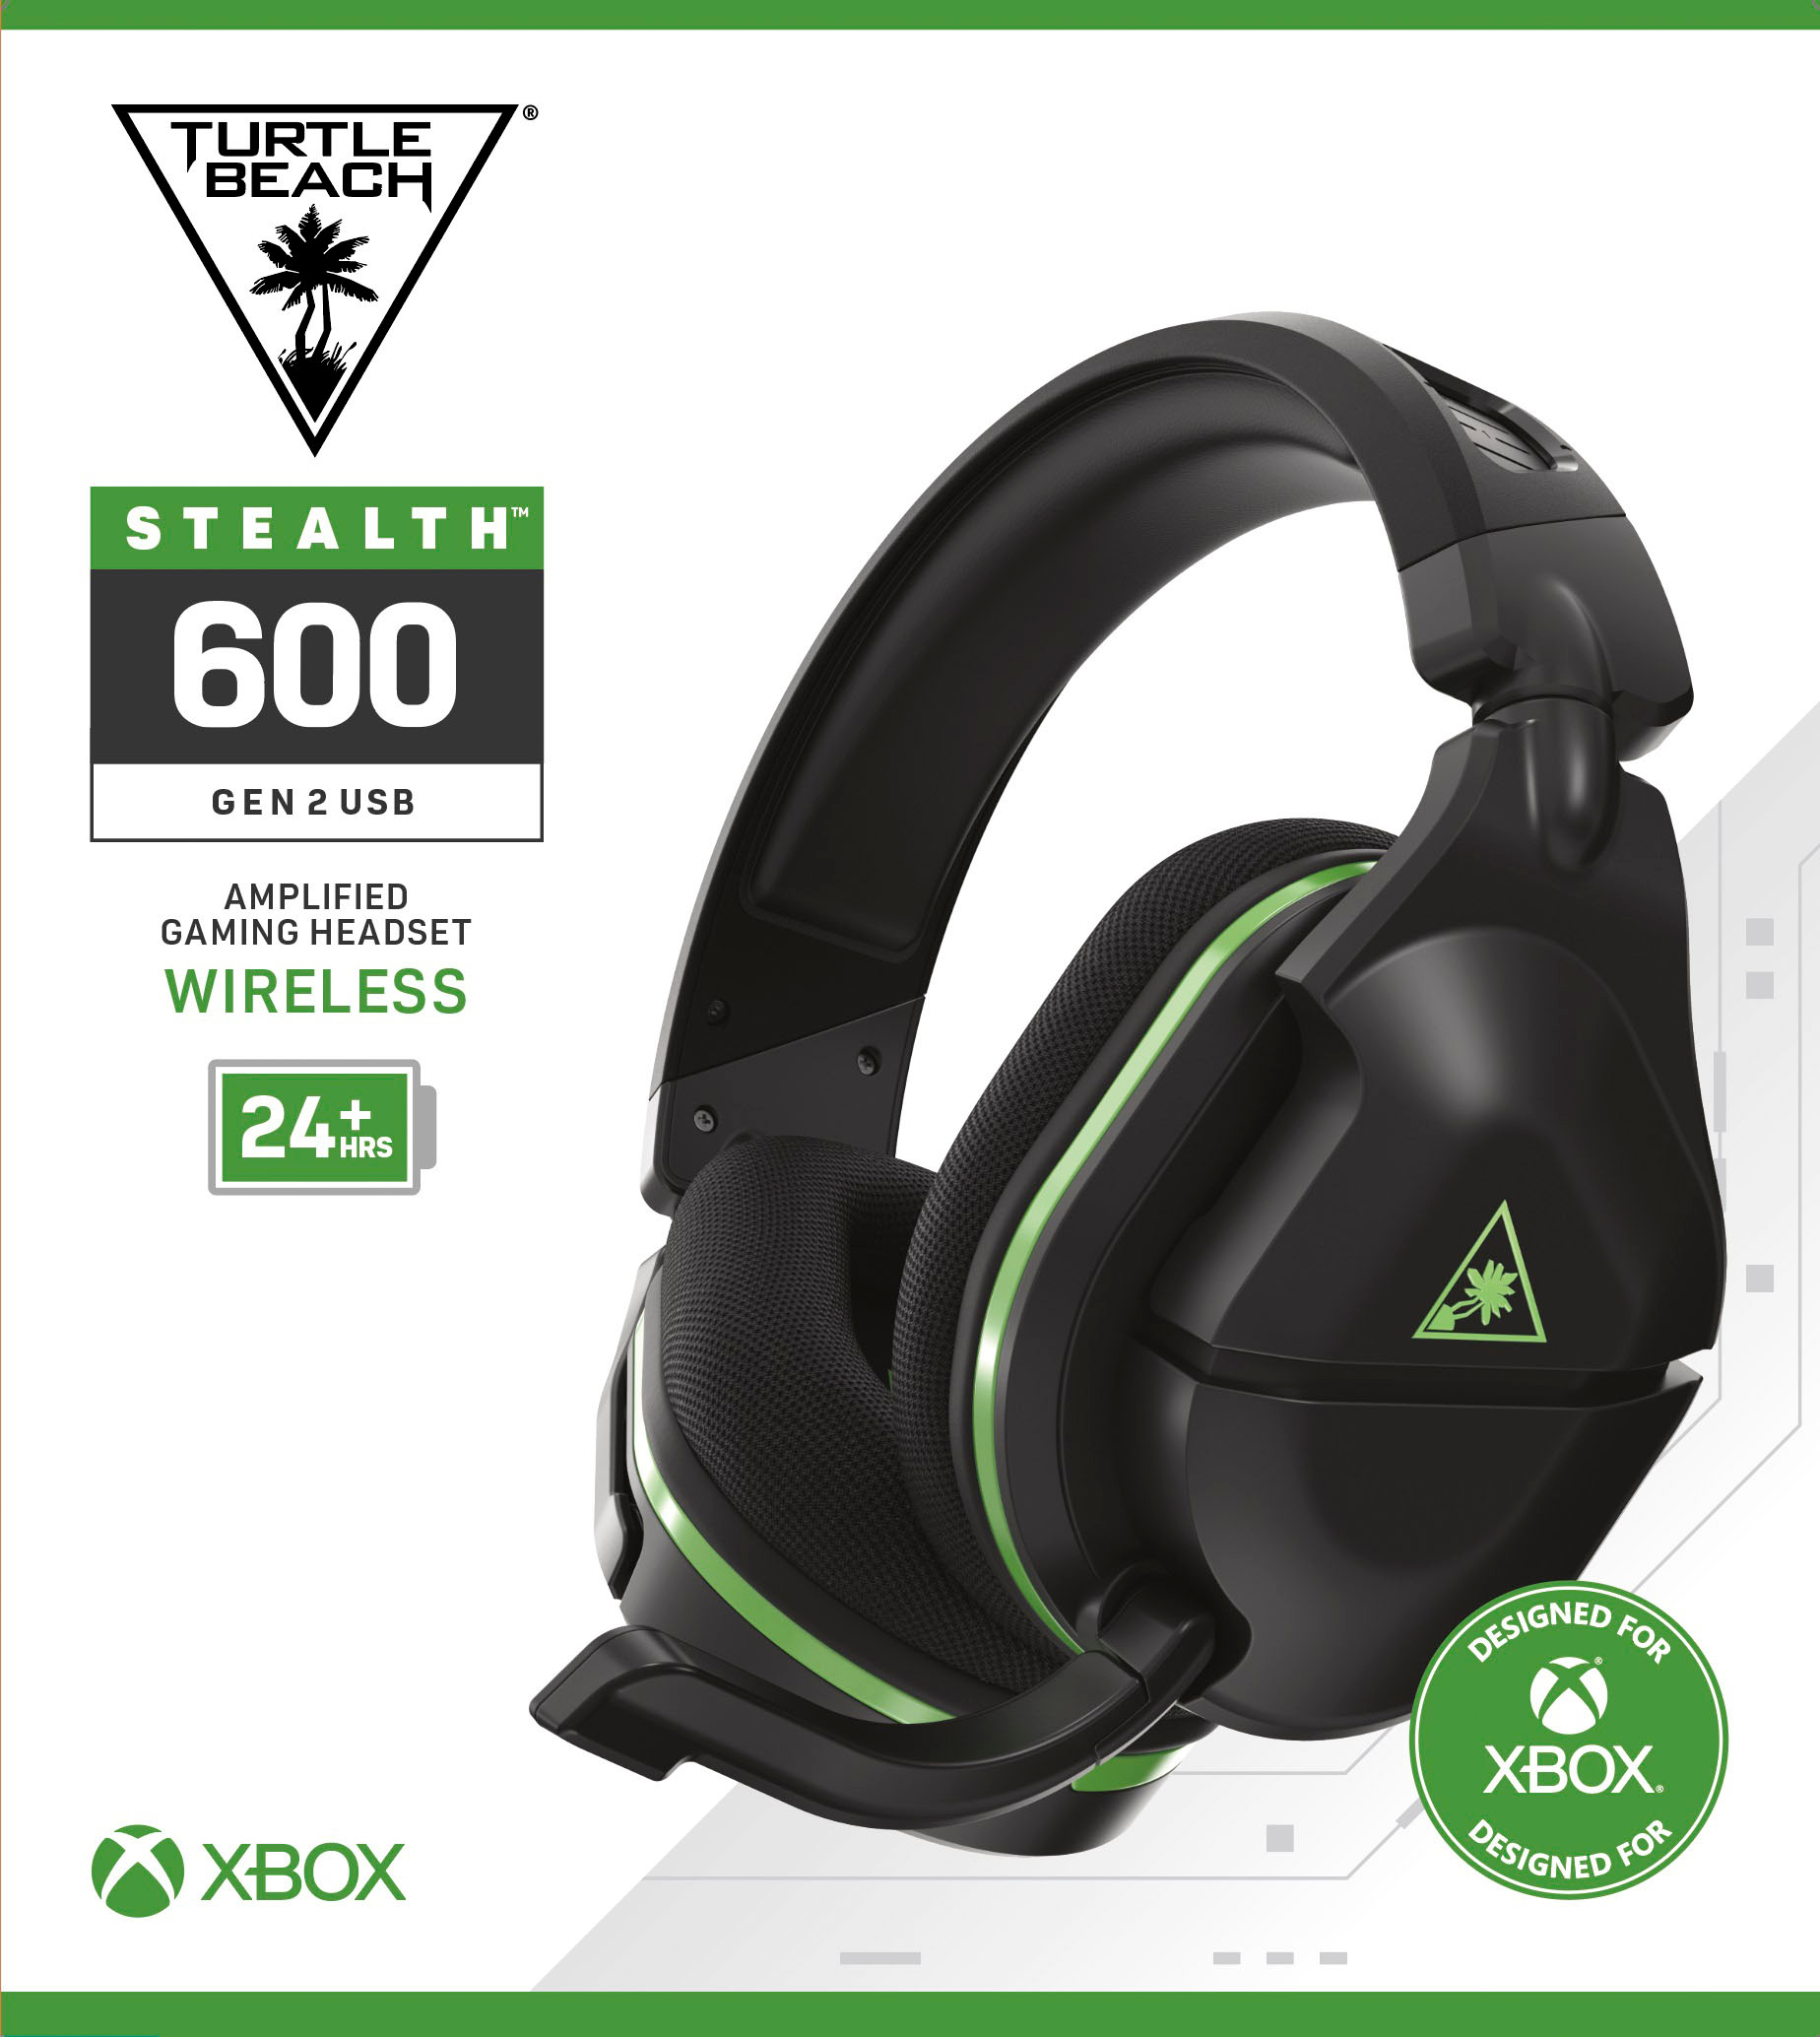 Ny mening Hængsel Initiativ Turtle Beach Stealth 600 Gen 2 USB Wireless Amplified Gaming Headset for  Xbox X|S, Xbox One 24 Hour Battery Black/Green TBS-2372-01 - Best Buy